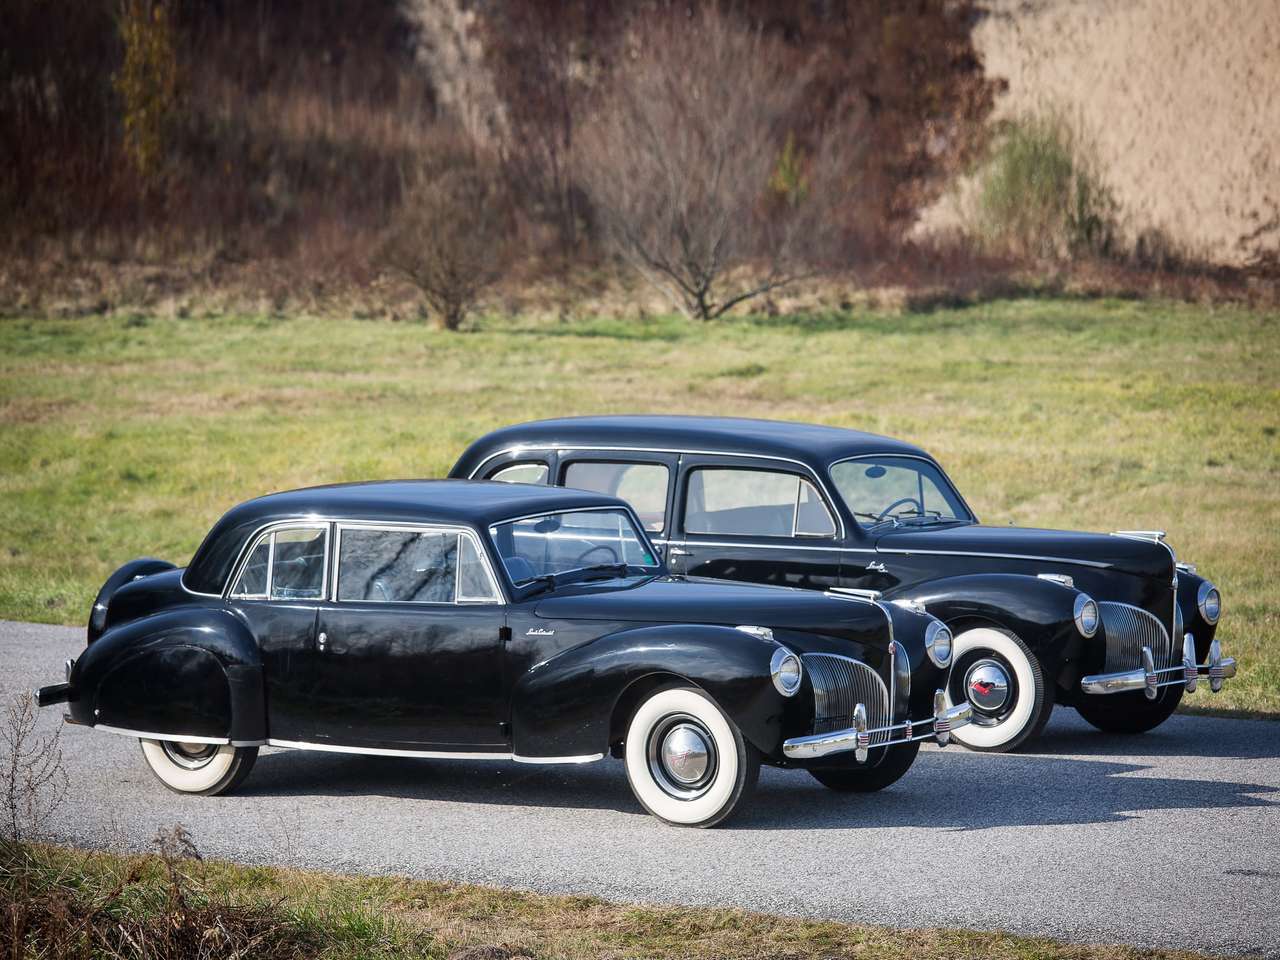 1941 Lincoln Continental Coupe & Lincoln Custom Li online puzzel